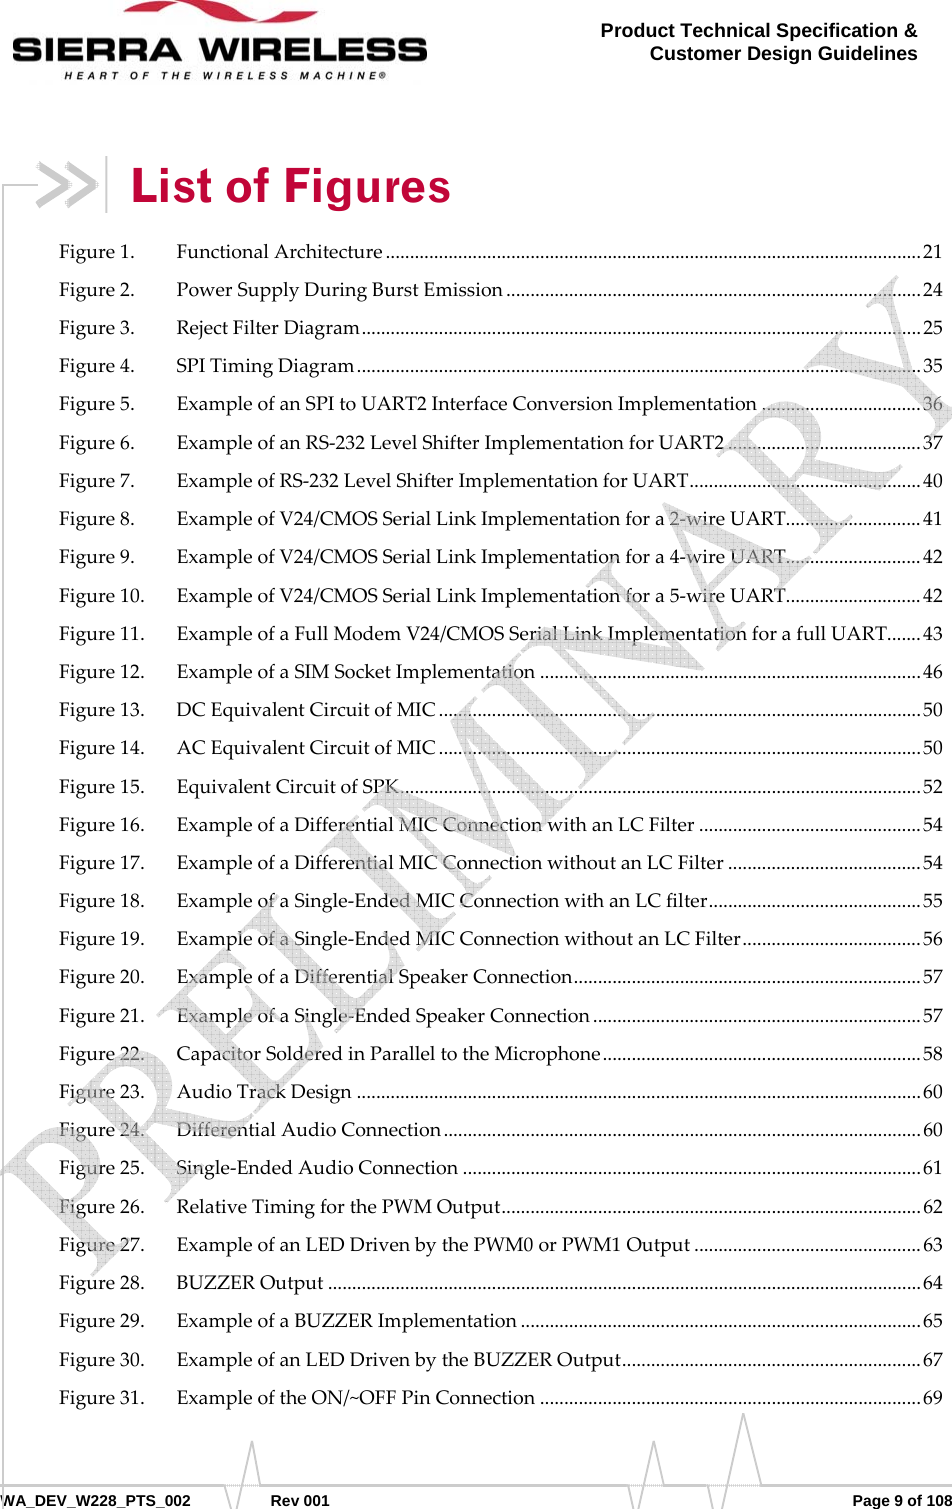      WA_DEV_W228_PTS_002 Rev 001  Page 9 of 108 Product Technical Specification &amp; Customer Design Guidelines List of Figures Figure1. FunctionalArchitecture...............................................................................................................21 Figure2. PowerSupplyDuringBurstEmission......................................................................................24 Figure3. RejectFilterDiagram....................................................................................................................25 Figure4. SPITimingDiagram.....................................................................................................................35 Figure5. ExampleofanSPItoUART2InterfaceConversionImplementation.................................36 Figure6. ExampleofanRS‐232LevelShifterImplementationforUART2........................................37 Figure7. ExampleofRS‐232LevelShifterImplementationforUART................................................40 Figure8. ExampleofV24/CMOSSerialLinkImplementationfora2‐wireUART............................41 Figure9. ExampleofV24/CMOSSerialLinkImplementationfora4‐wireUART............................42 Figure10. ExampleofV24/CMOSSerialLinkImplementationfora5‐wireUART............................42 Figure11. ExampleofaFullModemV24/CMOSSerialLinkImplementationforafullUART.......43 Figure12. ExampleofaSIMSocketImplementation...............................................................................46 Figure13. DCEquivalentCircuitofMIC....................................................................................................50 Figure14. ACEquivalentCircuitofMIC....................................................................................................50 Figure15. EquivalentCircuitofSPK............................................................................................................52 Figure16. ExampleofaDifferentialMICConnectionwithanLCFilter..............................................54 Figure17. ExampleofaDifferentialMICConnectionwithoutanLCFilter........................................54 Figure18. ExampleofaSingle‐EndedMICConnectionwithanLCfilter............................................55 Figure19. ExampleofaSingle‐EndedMICConnectionwithoutanLCFilter.....................................56 Figure20. ExampleofaDifferentialSpeakerConnection........................................................................57 Figure21. ExampleofaSingle‐EndedSpeakerConnection....................................................................57 Figure22. CapacitorSolderedinParalleltotheMicrophone..................................................................58 Figure23. AudioTrackDesign.....................................................................................................................60 Figure24. DifferentialAudioConnection...................................................................................................60 Figure25. Single‐EndedAudioConnection...............................................................................................61 Figure26. RelativeTimingforthePWMOutput.......................................................................................62 Figure27. ExampleofanLEDDrivenbythePWM0orPWM1Output...............................................63 Figure28. BUZZEROutput...........................................................................................................................64 Figure29. ExampleofaBUZZERImplementation...................................................................................65 Figure30. ExampleofanLEDDrivenbytheBUZZEROutput..............................................................67 Figure31. ExampleoftheON/~OFFPinConnection...............................................................................69    